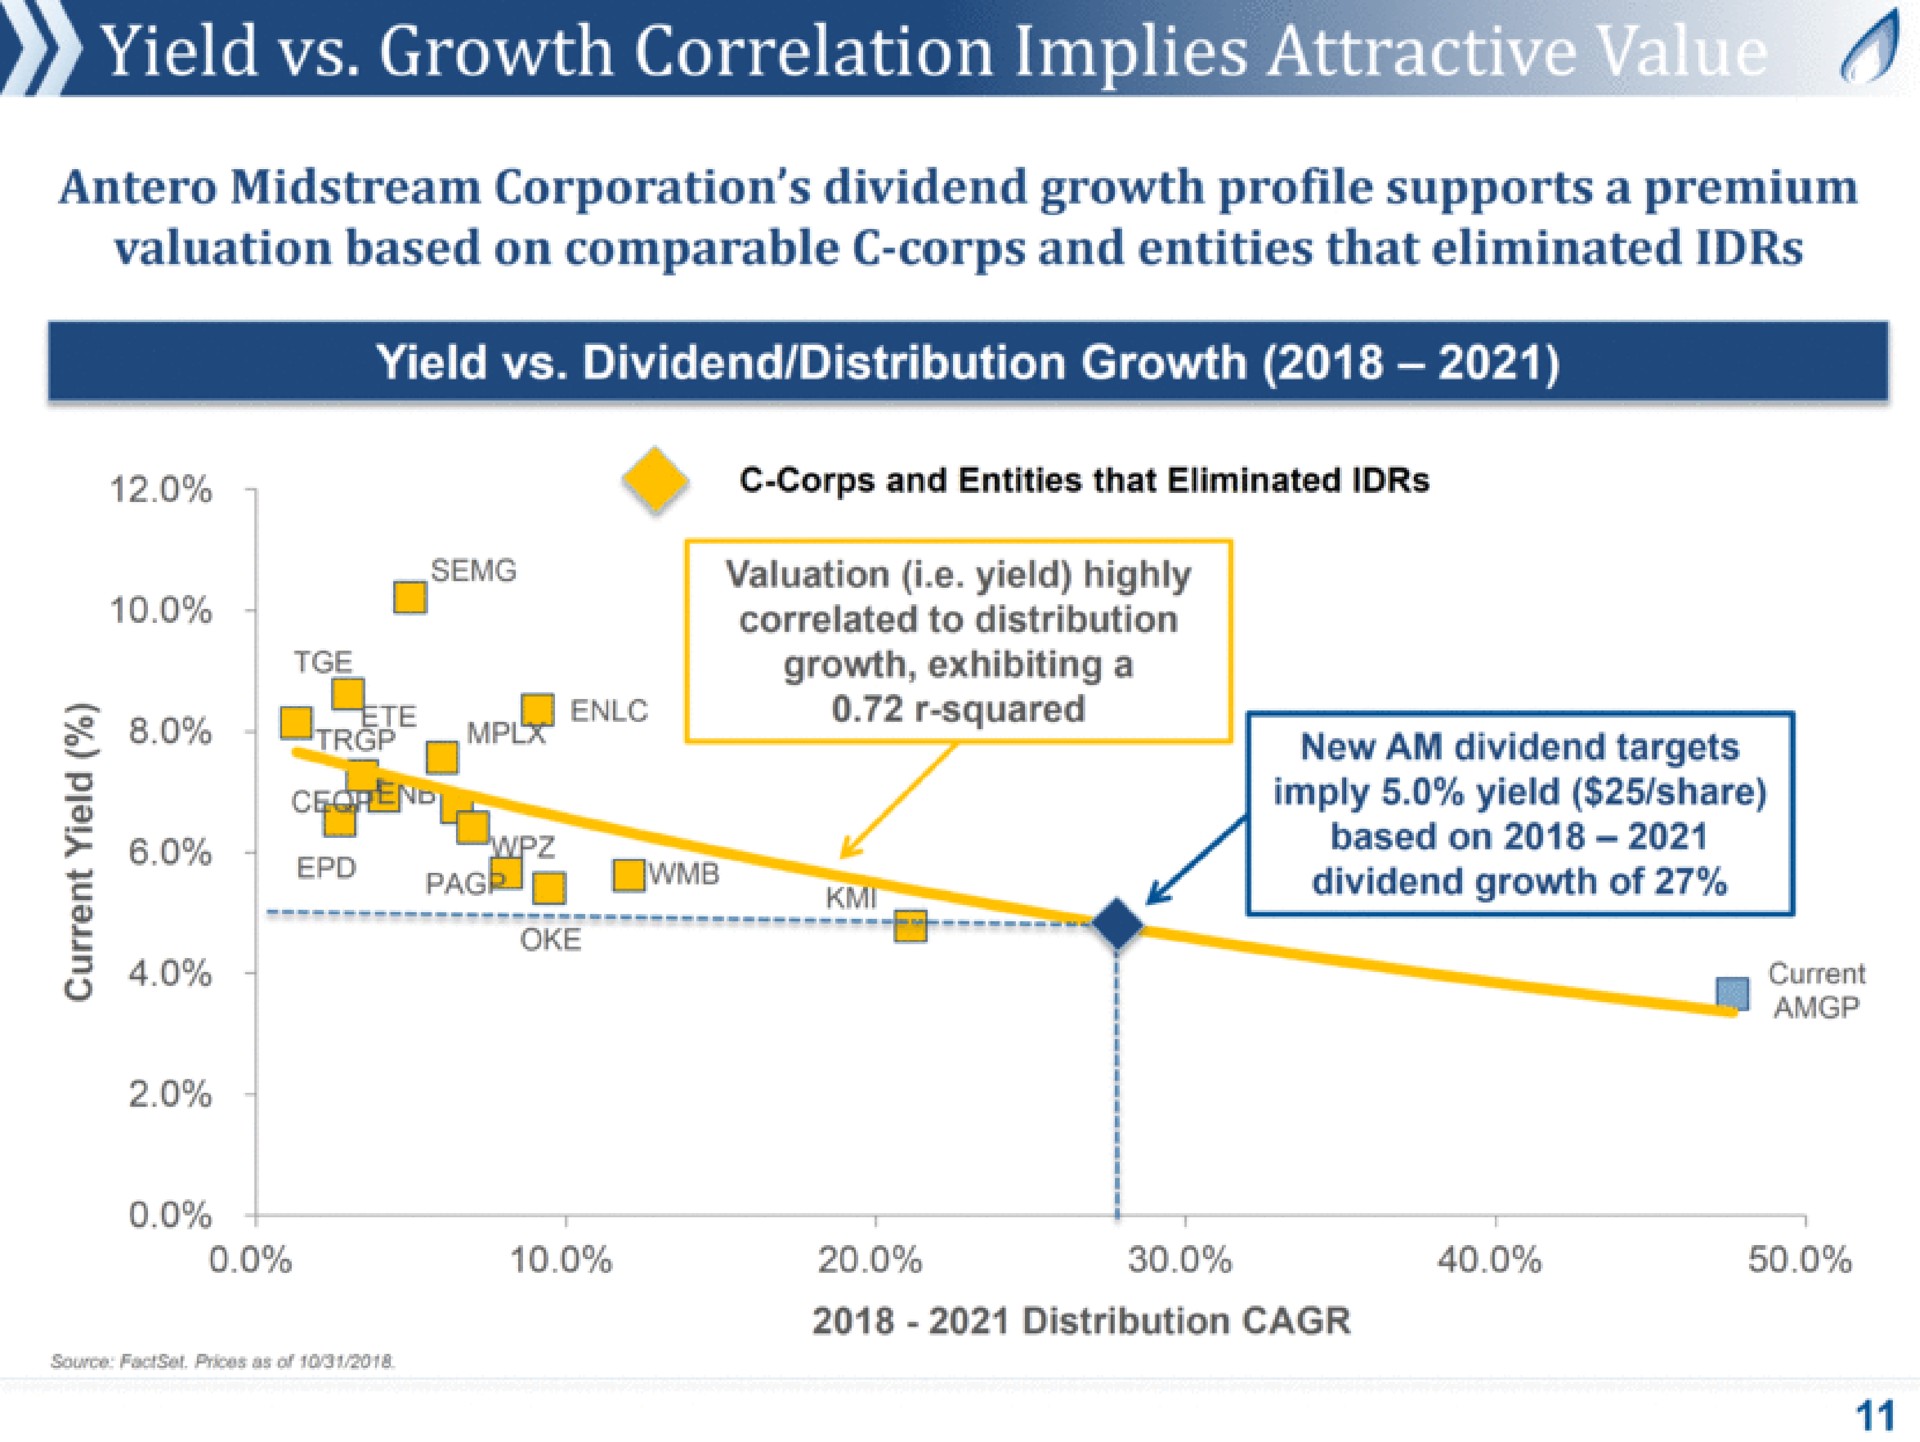 yield growth correlation implies midstream corporation dividend growth profile supports a premium valuation based on comparable corps and entities that eliminated yield dividend distribution growth a pack correlated to distribution was new am dividend targets based on dividend growth of by ame | Antero Midstream Partners